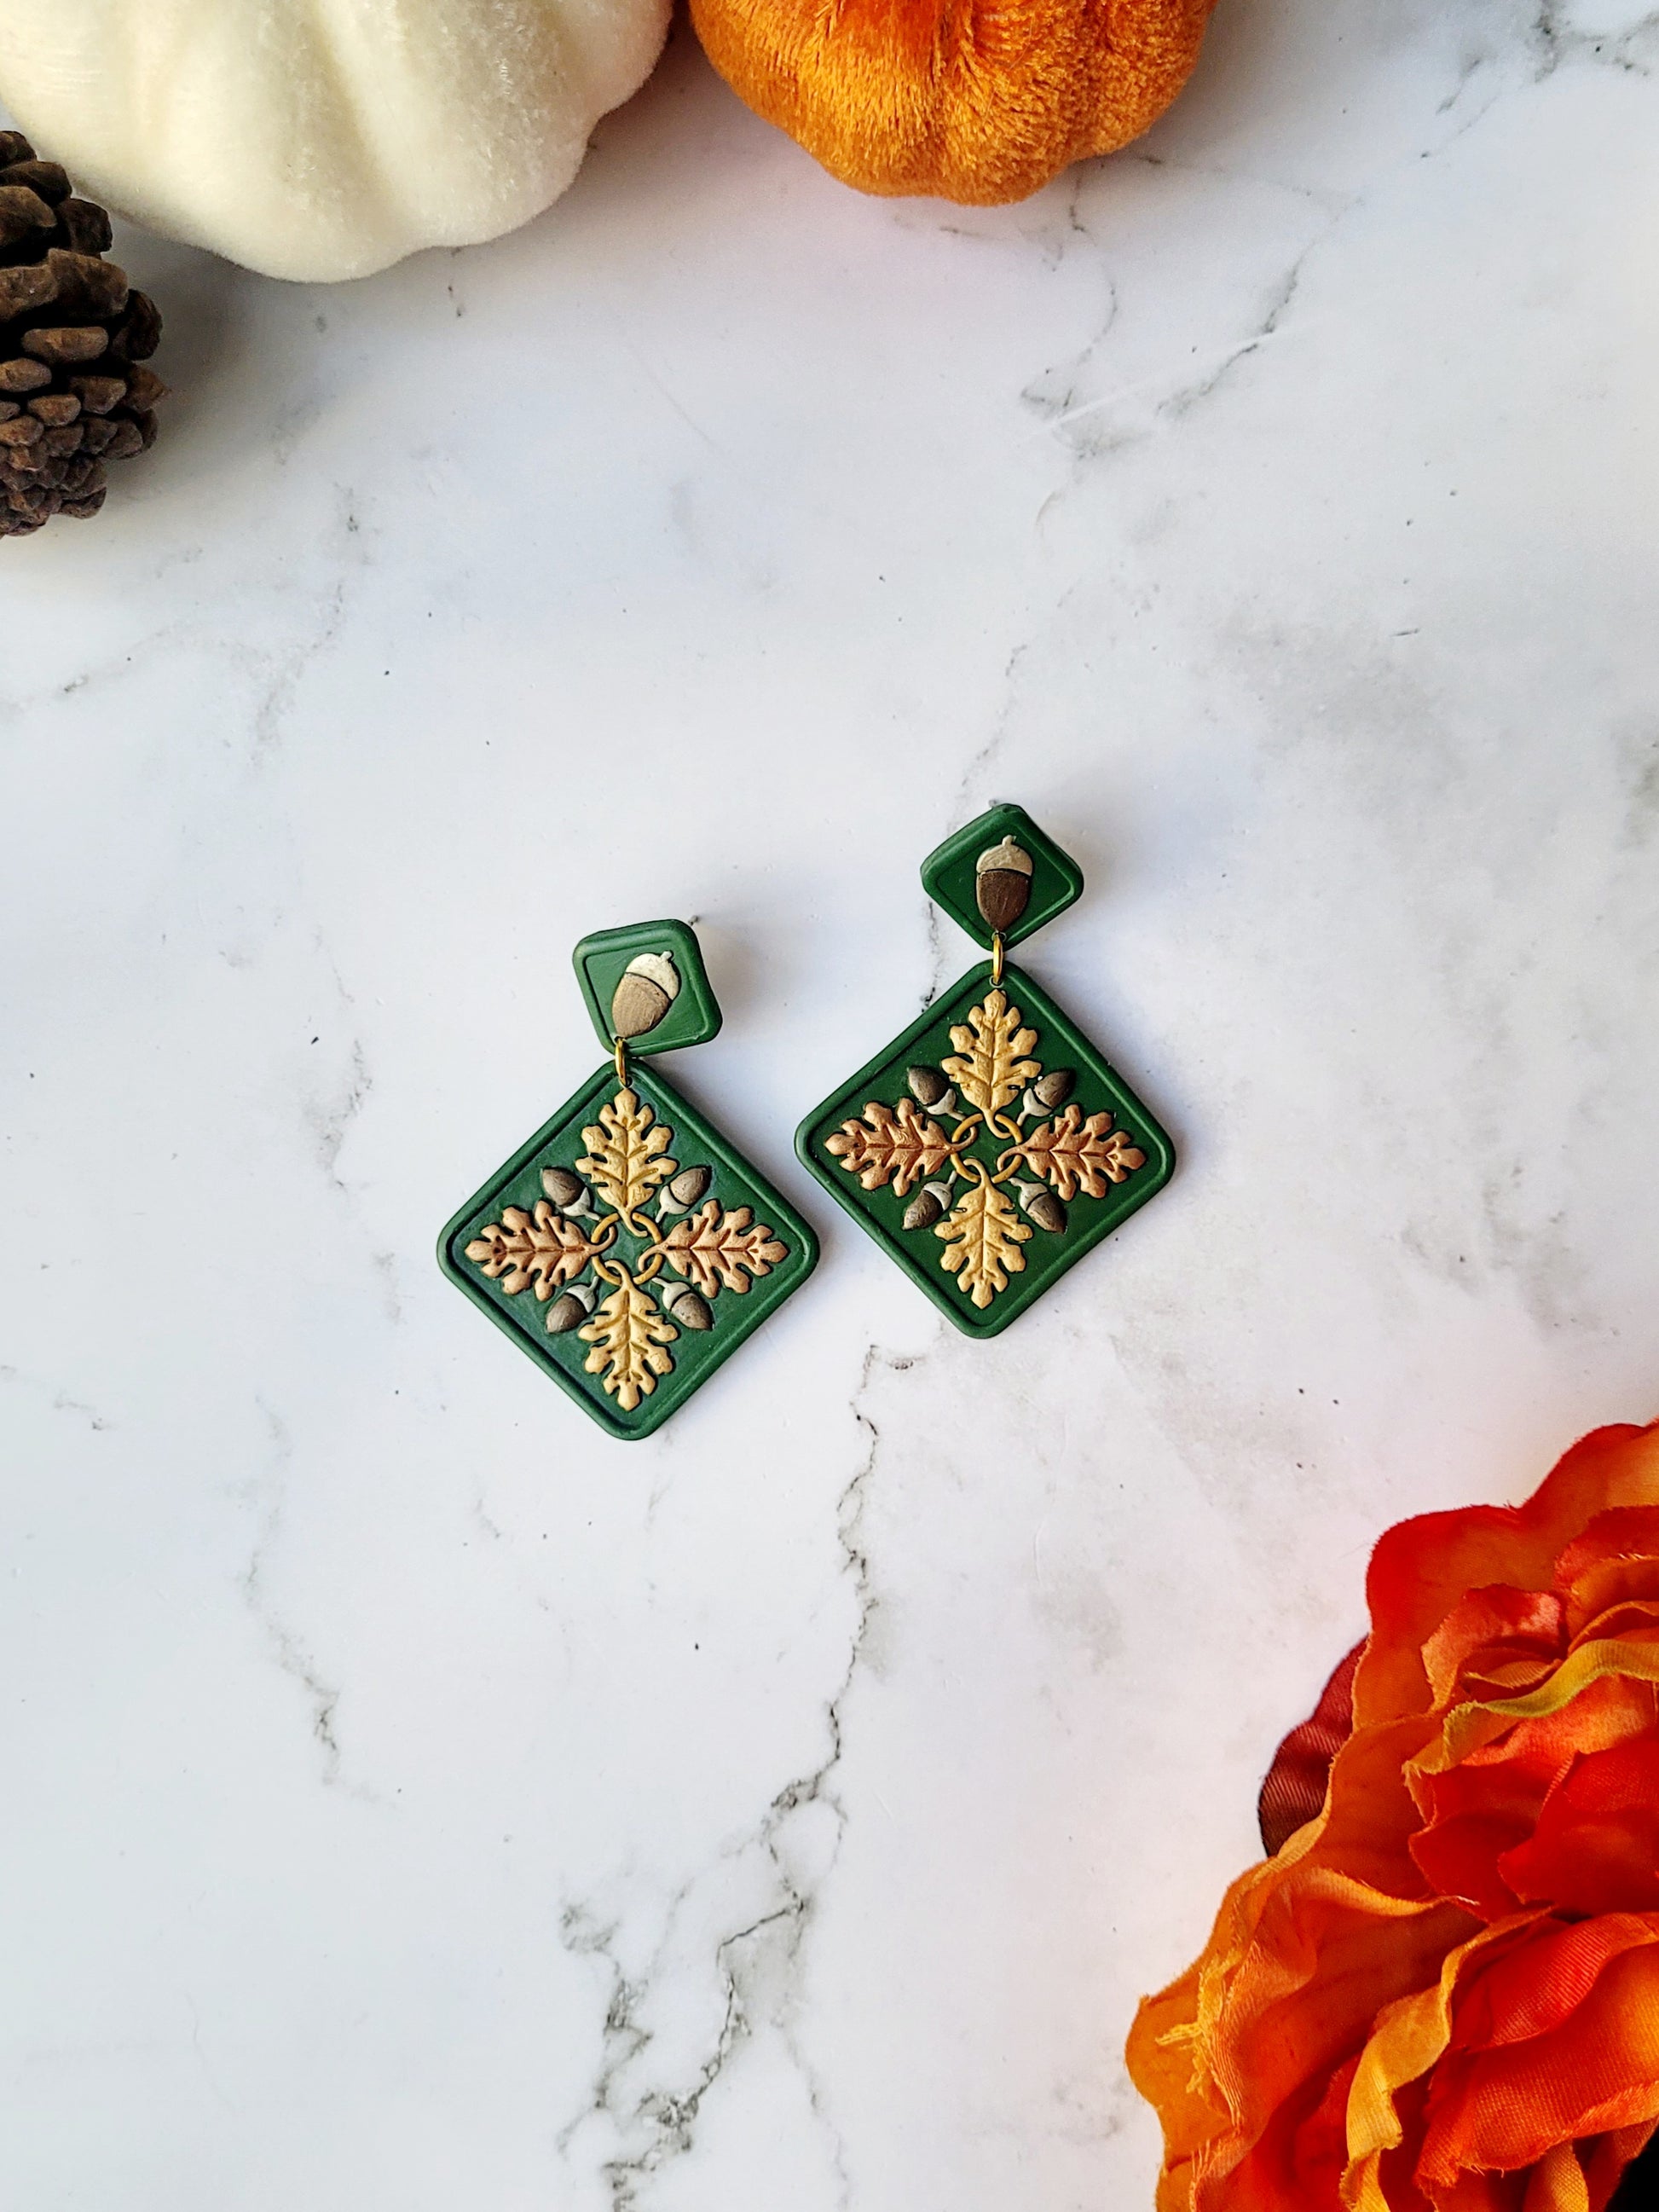 Green diamond shaped earrings with metallic acorns and oak leaves. Sitting on a white marble background with pumpkins and flowers in the background. 